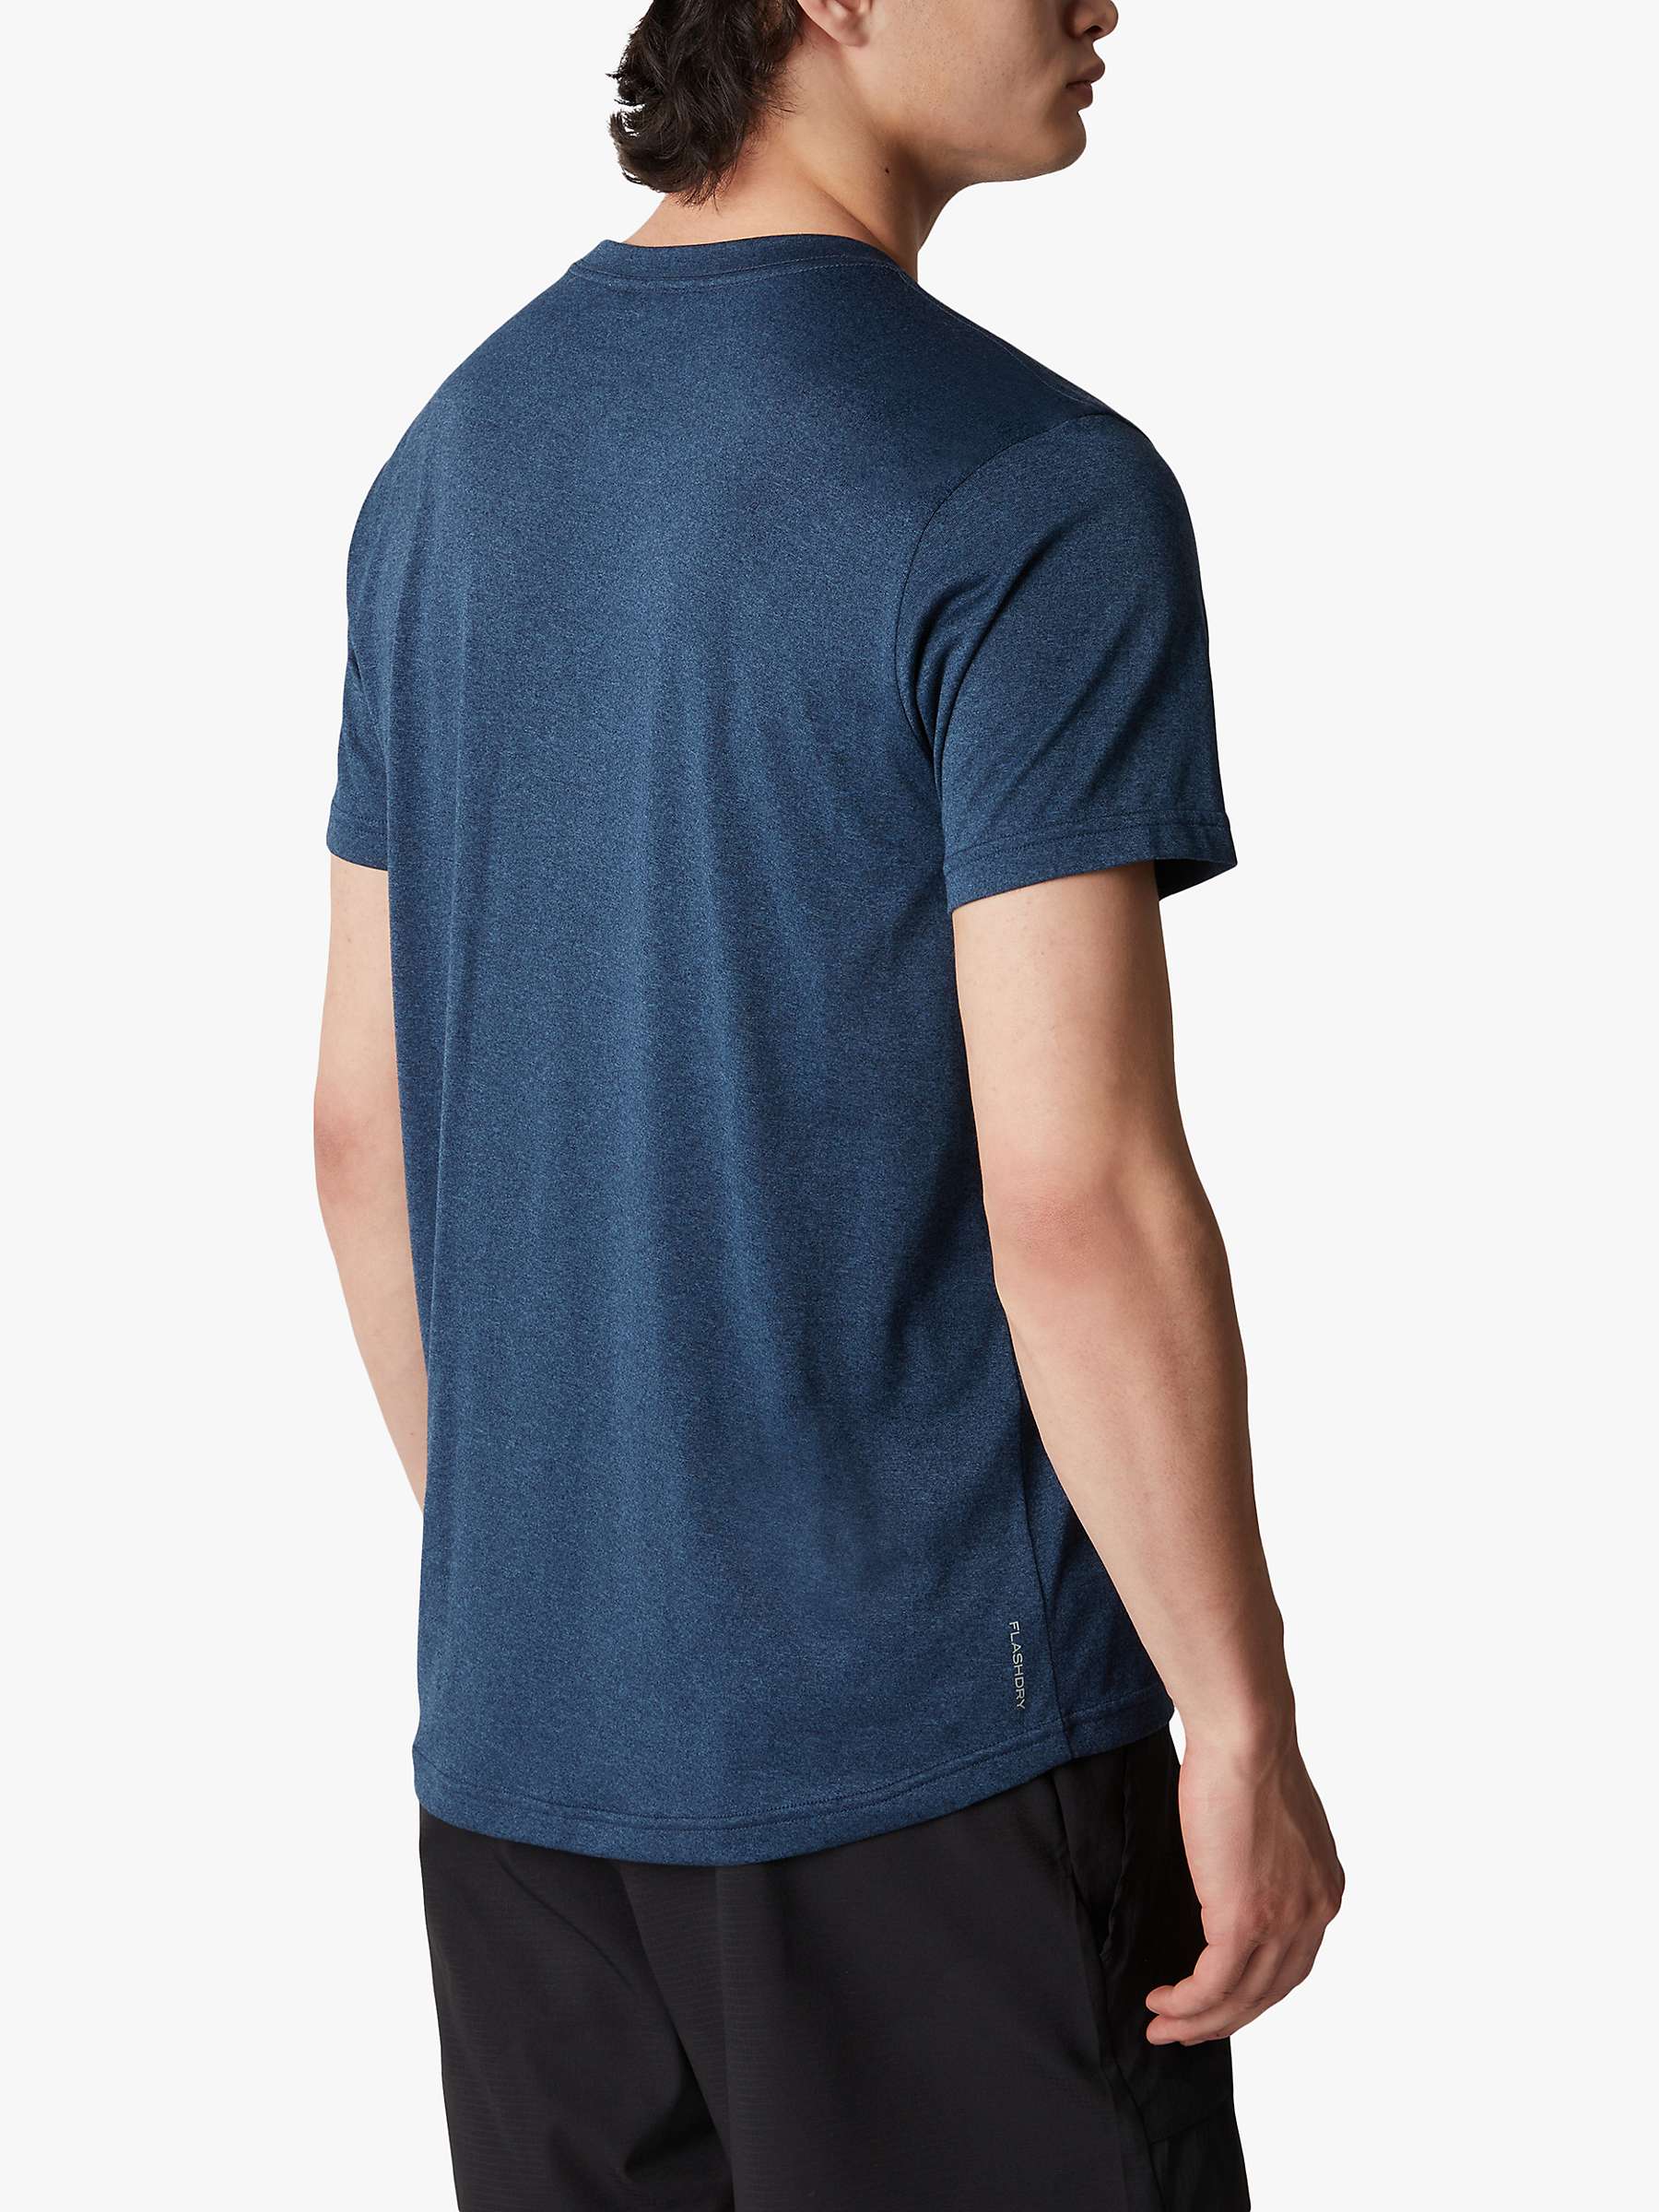 Buy The North Face Reaxion Amp T-Shirt, Blue Heather Online at johnlewis.com